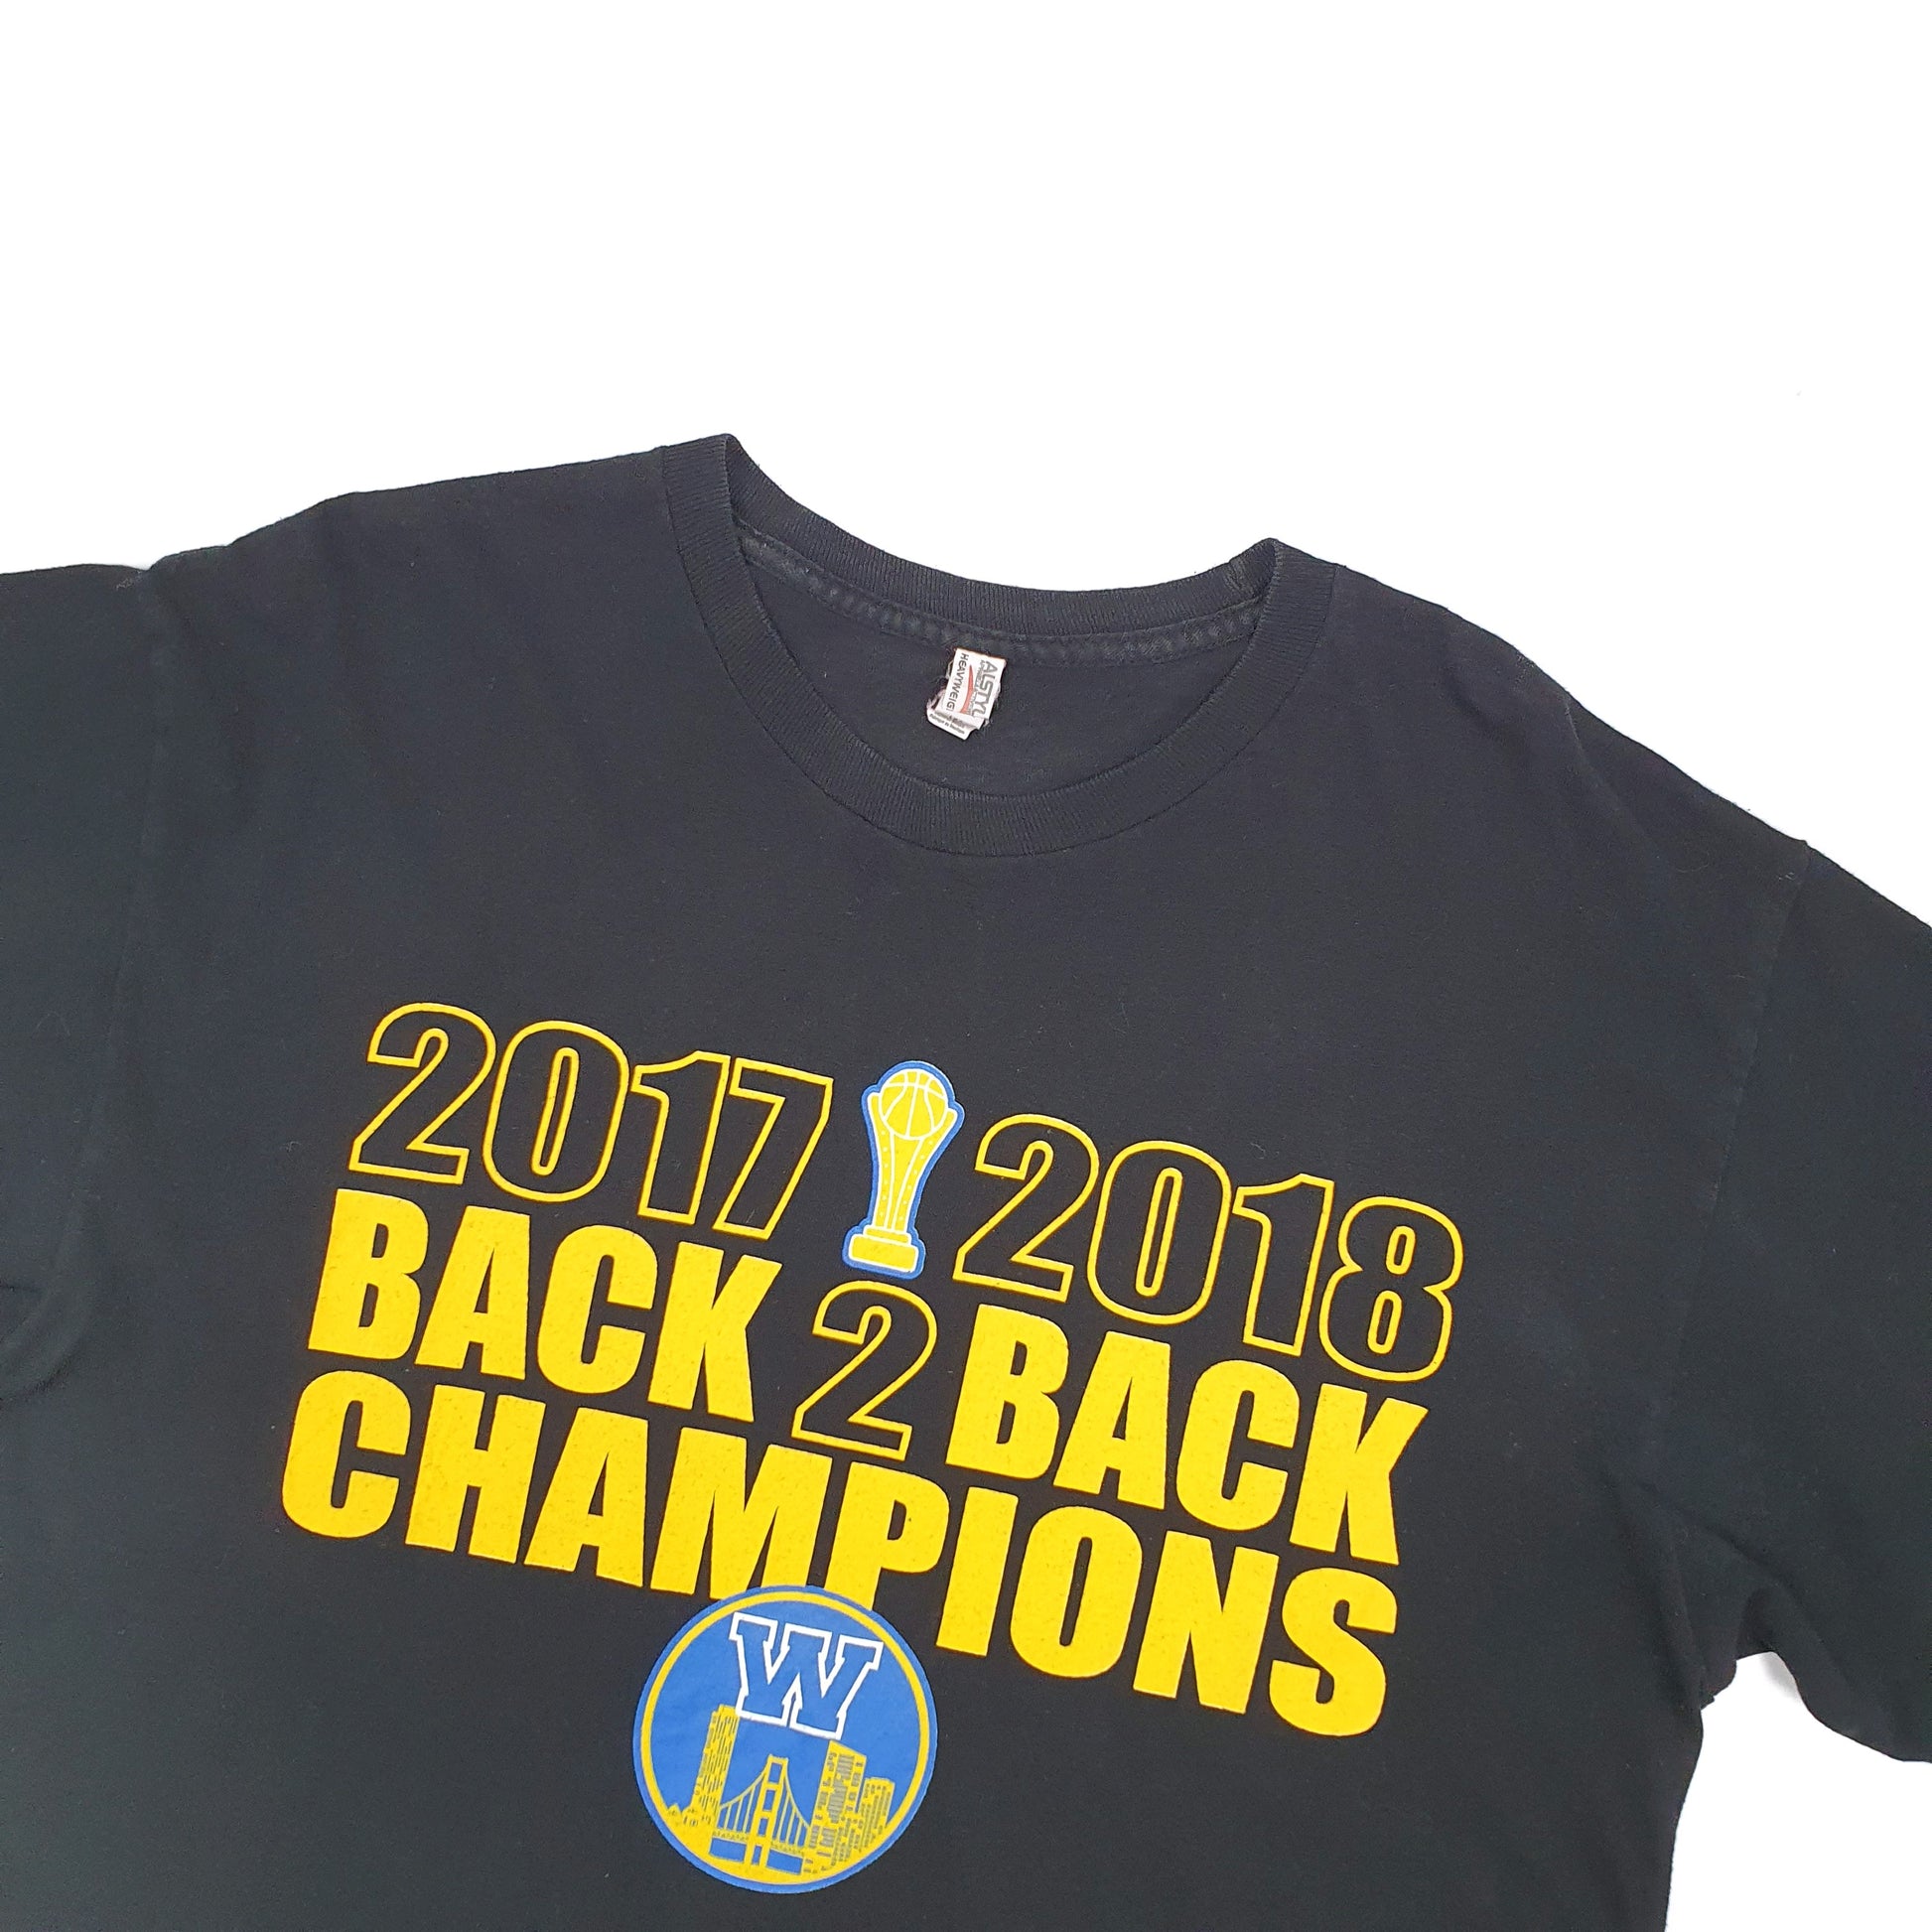 Allstyle USA Back to Back Champions Short Sleeve T Shirt Black